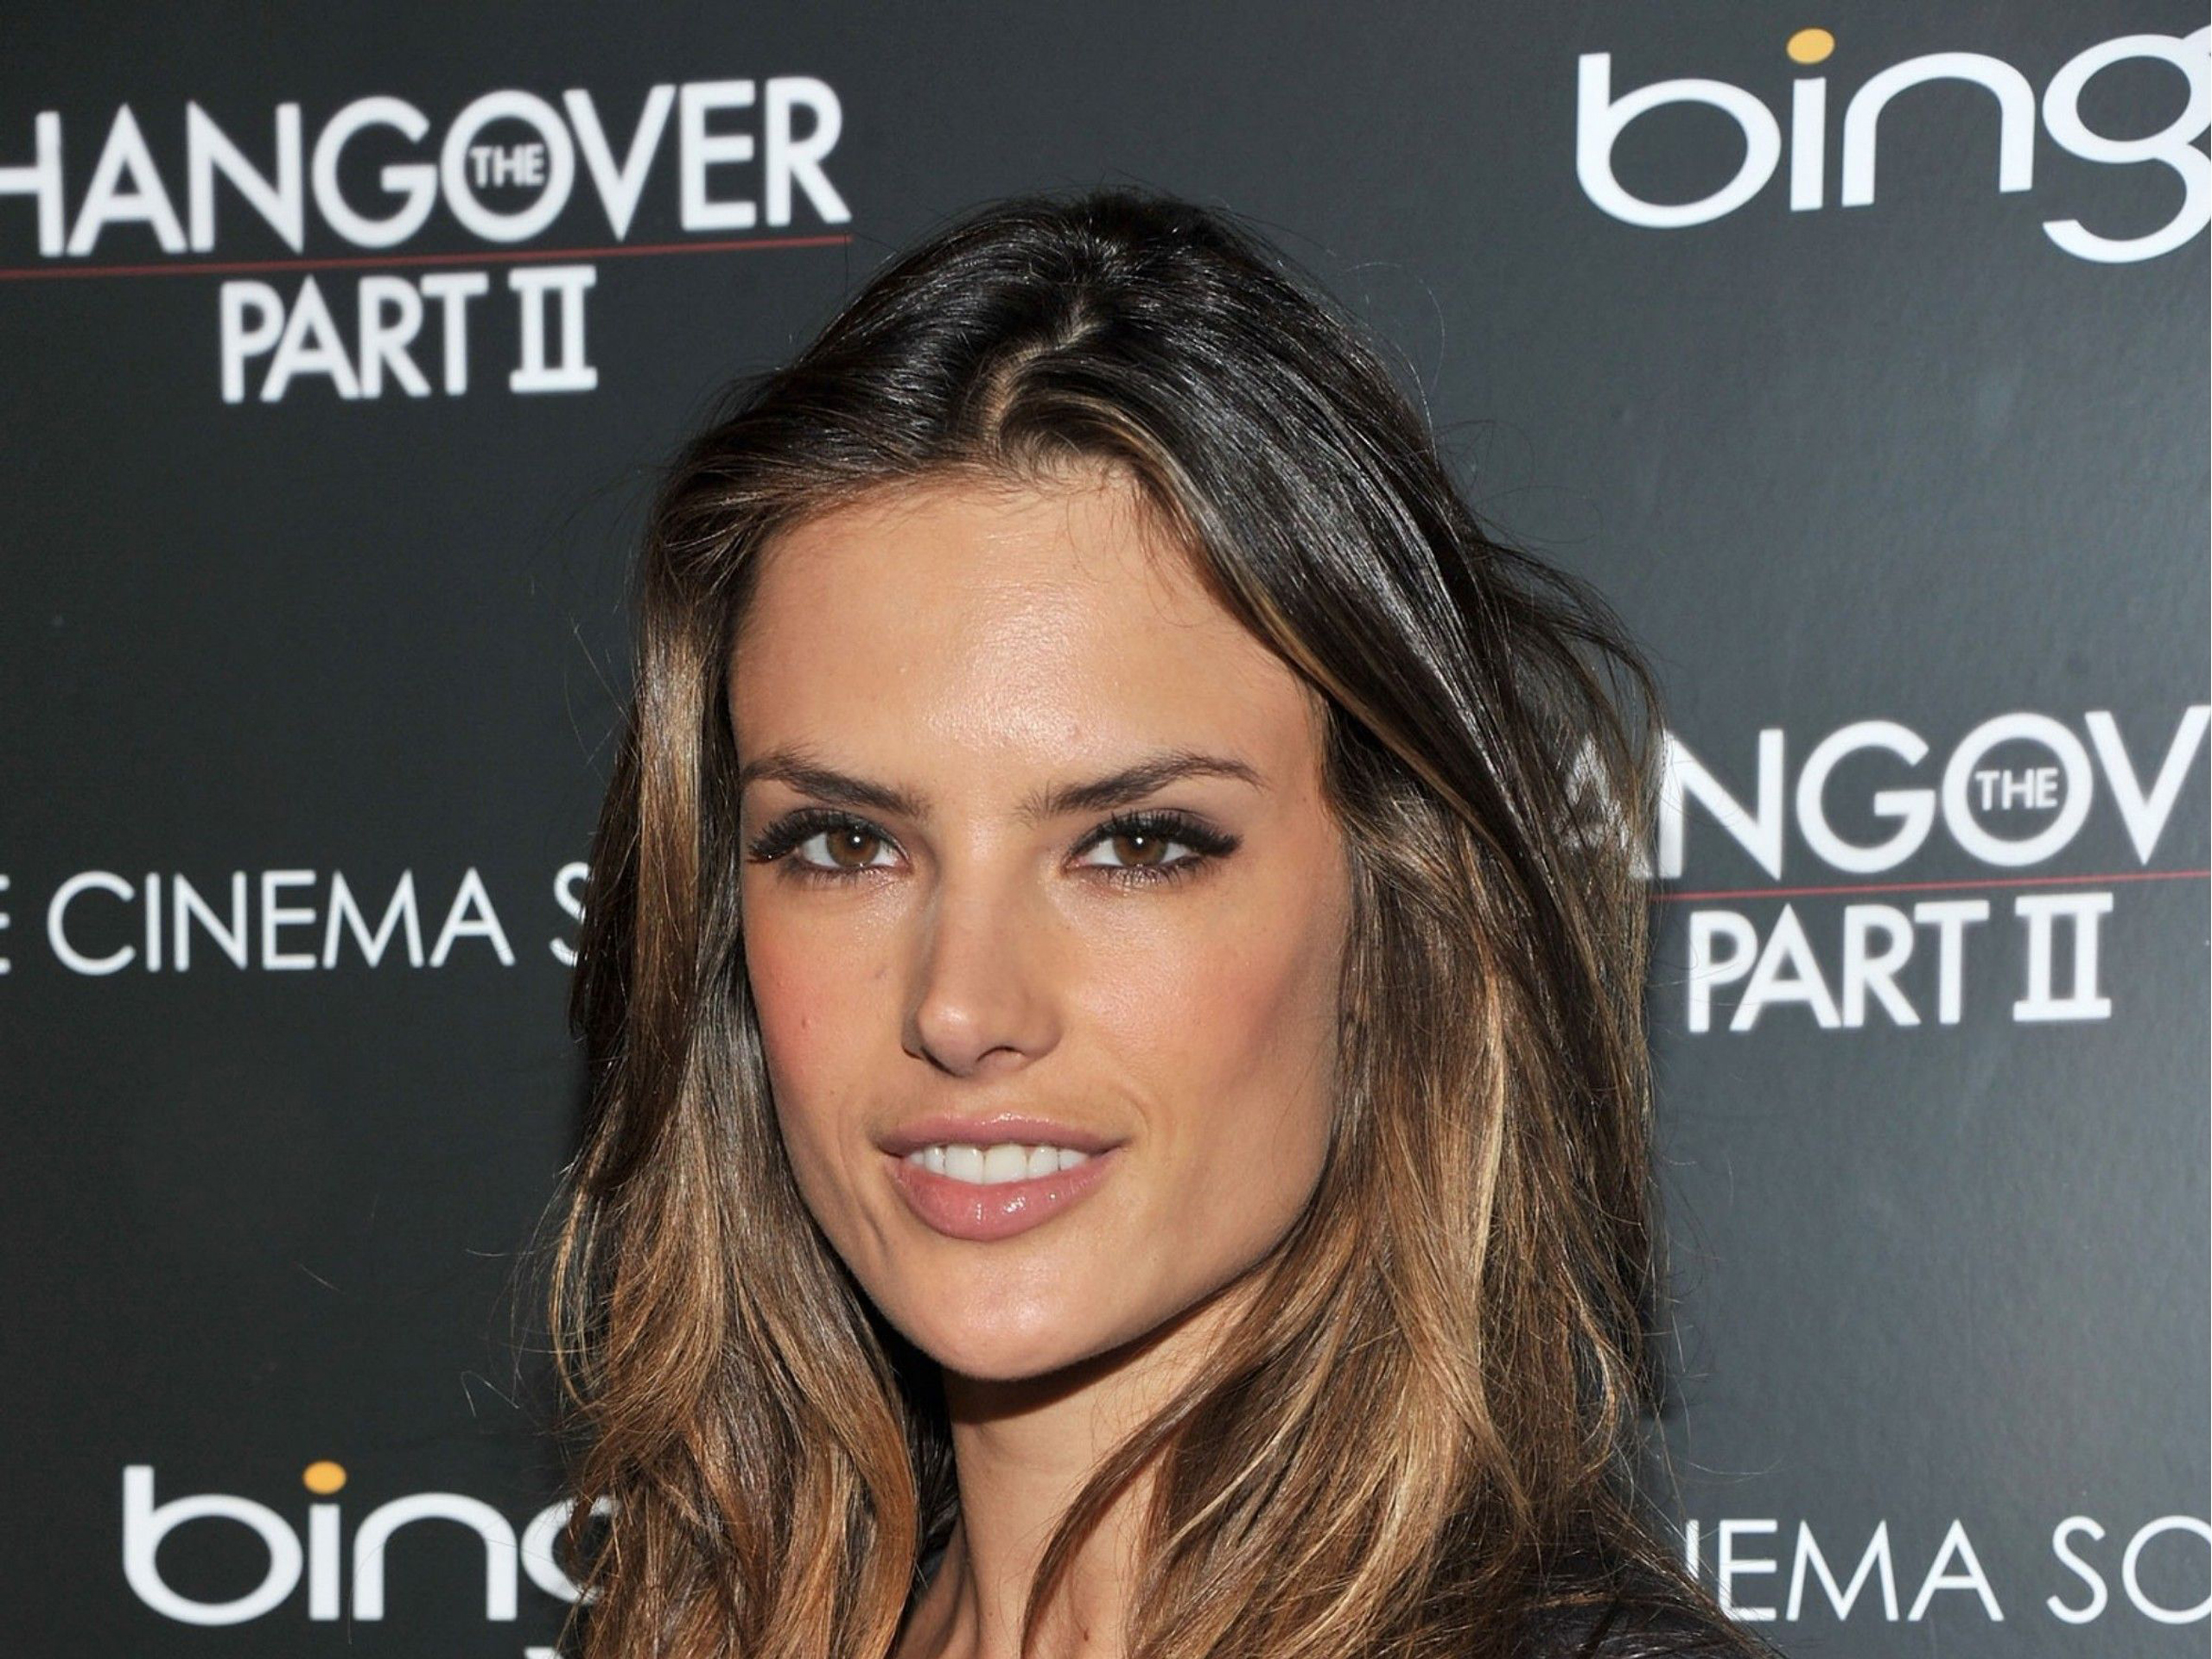 How rich is Alessandra Ambrosio?